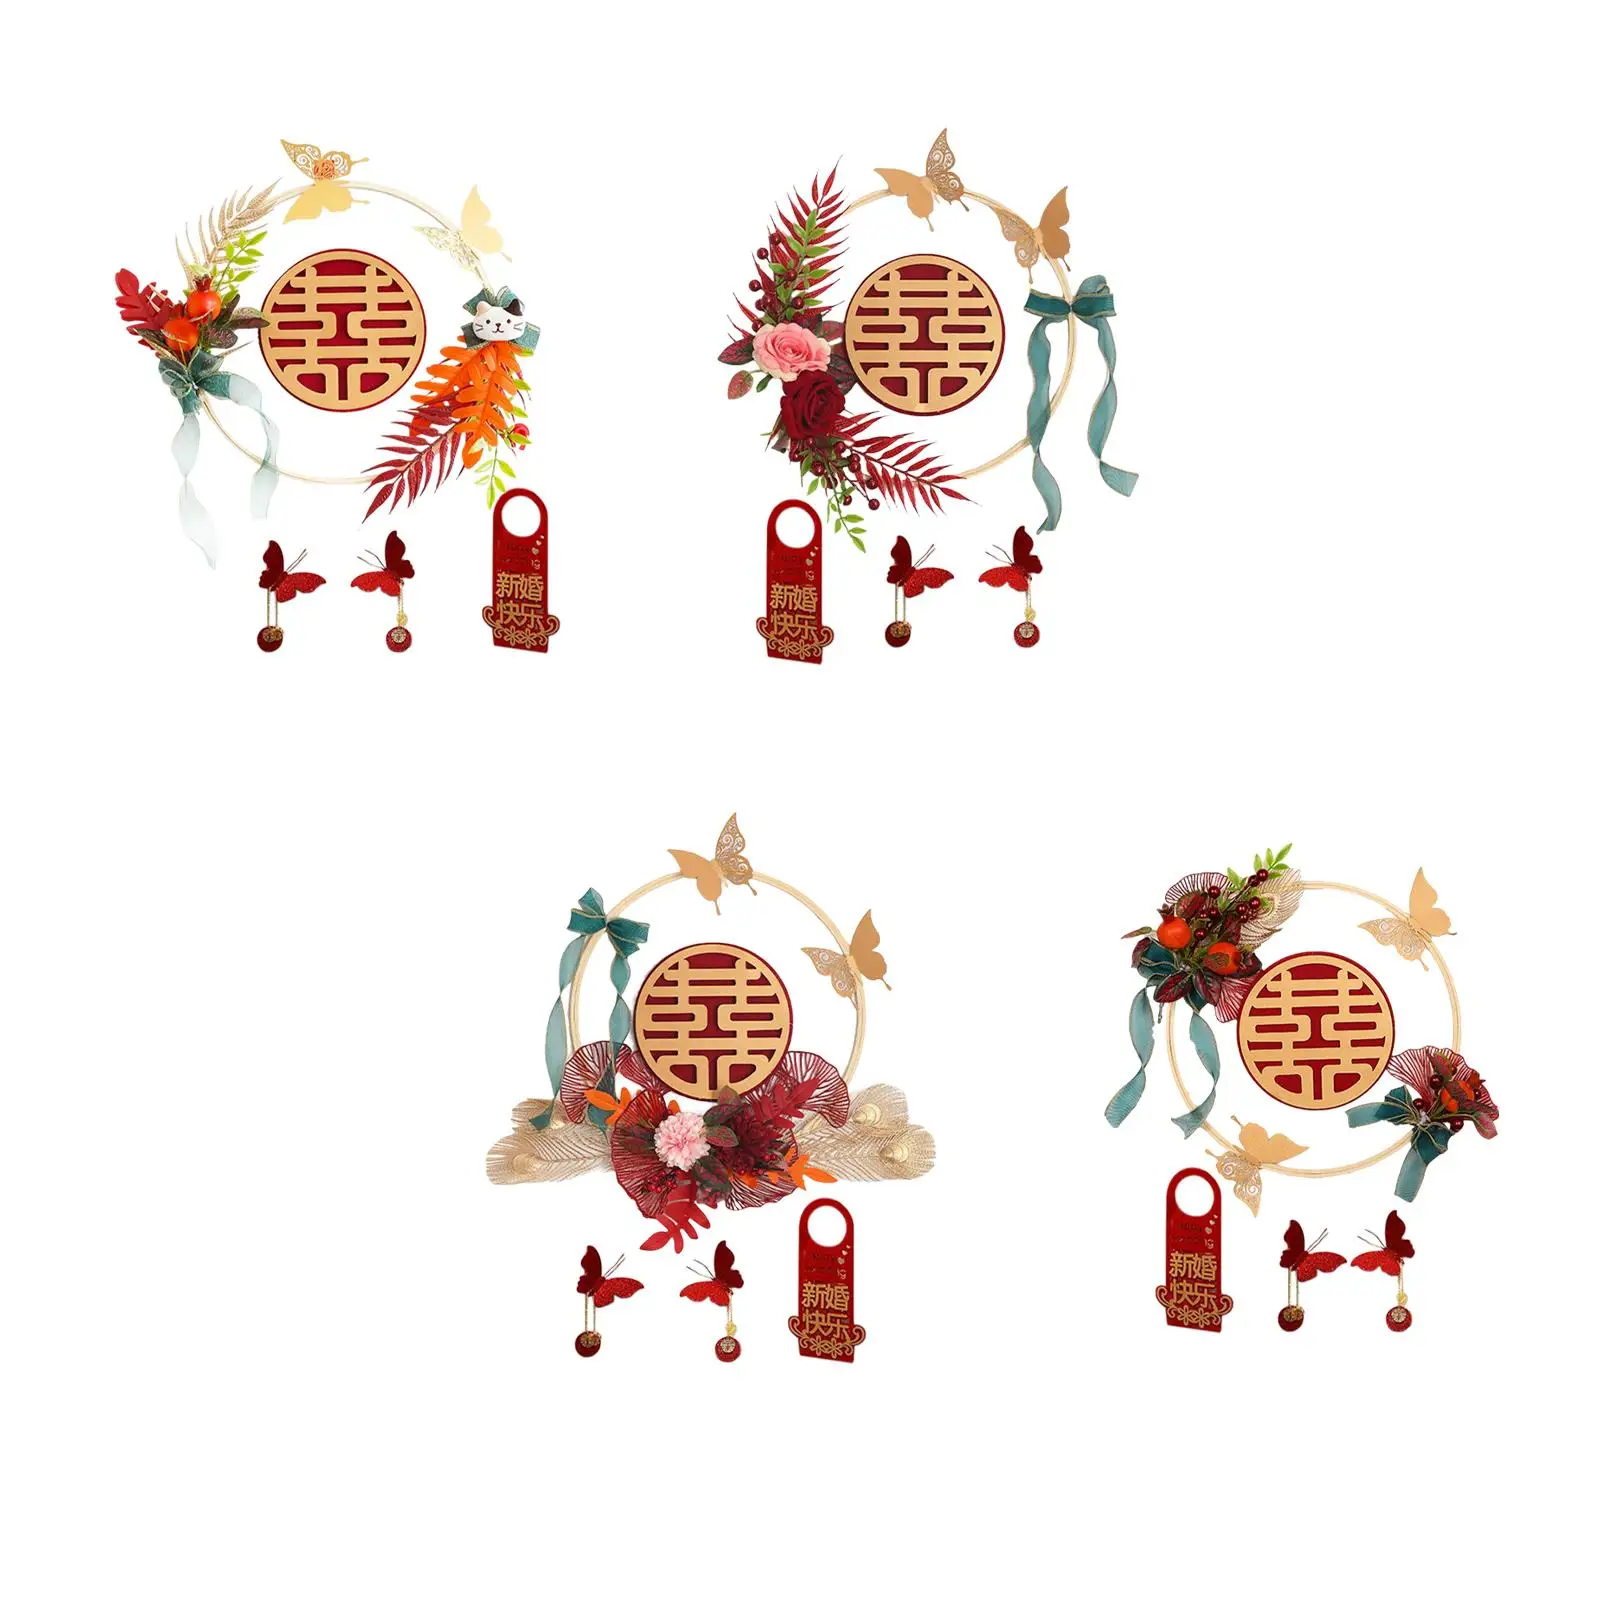 Chinese Wedding Double Happiness Hanging Garland Wall Door Ornaments Home Bedroom Decor Decorative DIY New House Supplies